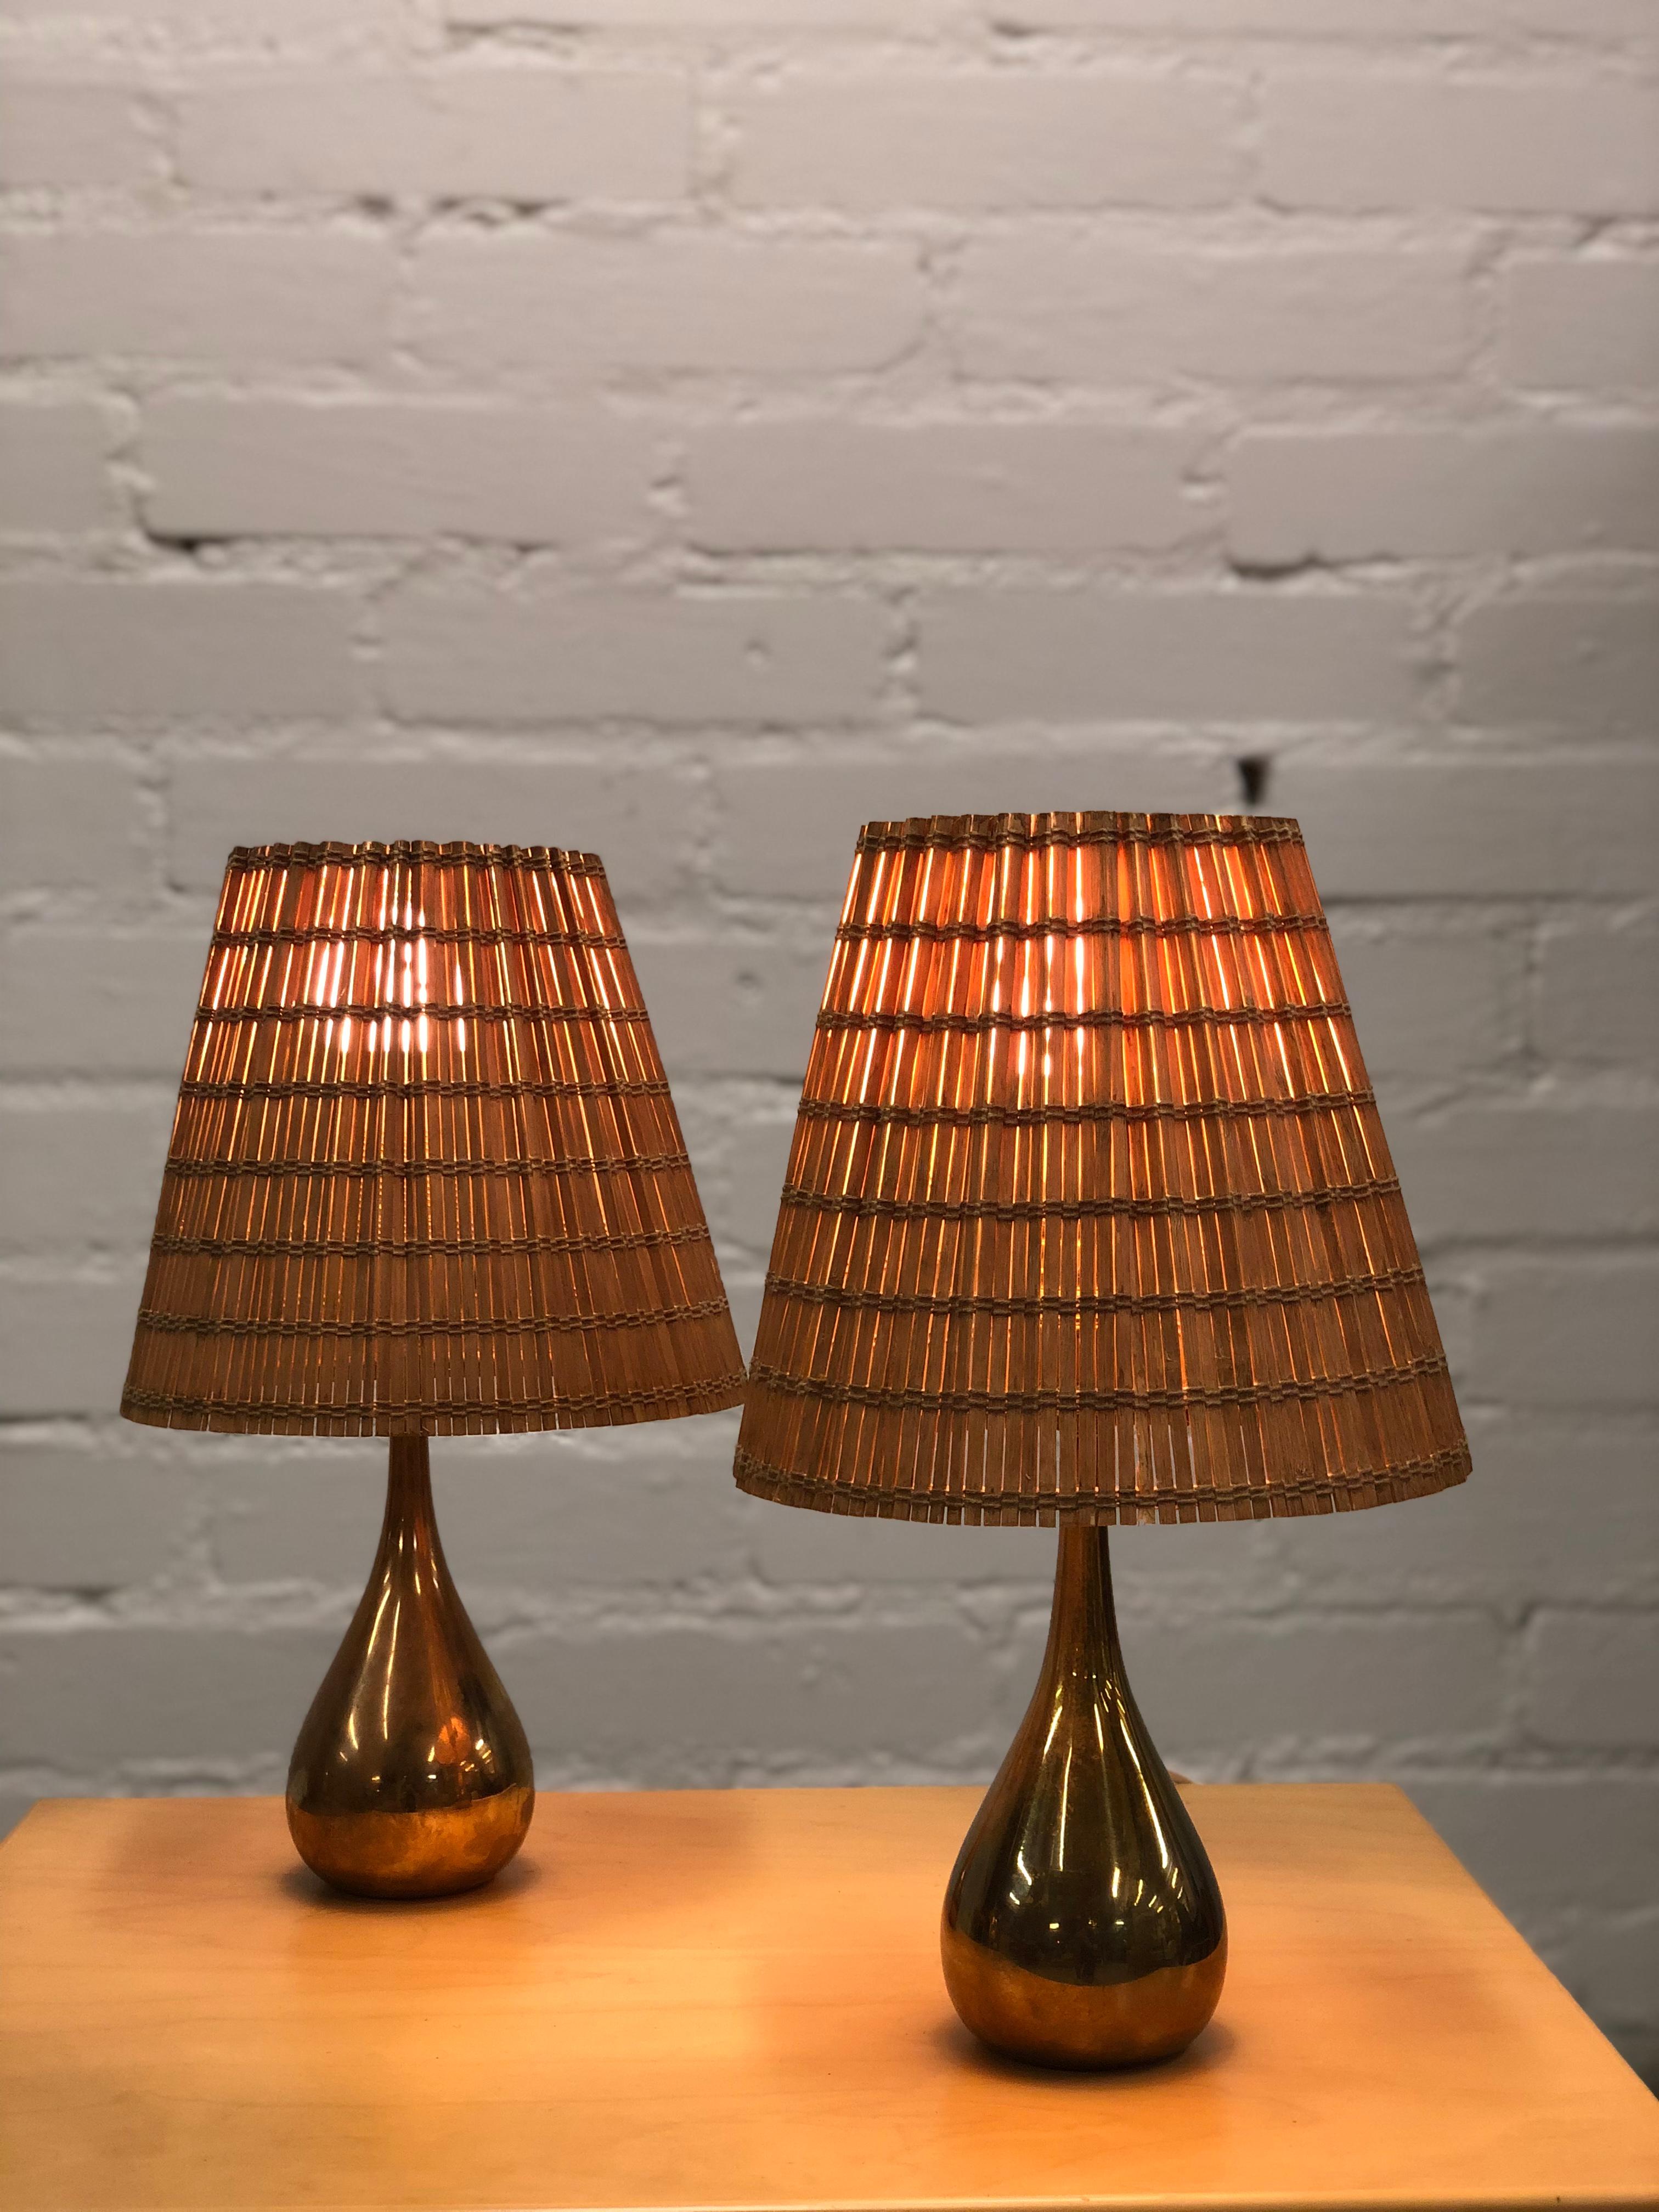 A pair of table lamps in full brass with a new rattan shade. Designed by Mauri Almari and manufactured by Idman. This model k11-21, is often referred to as the 